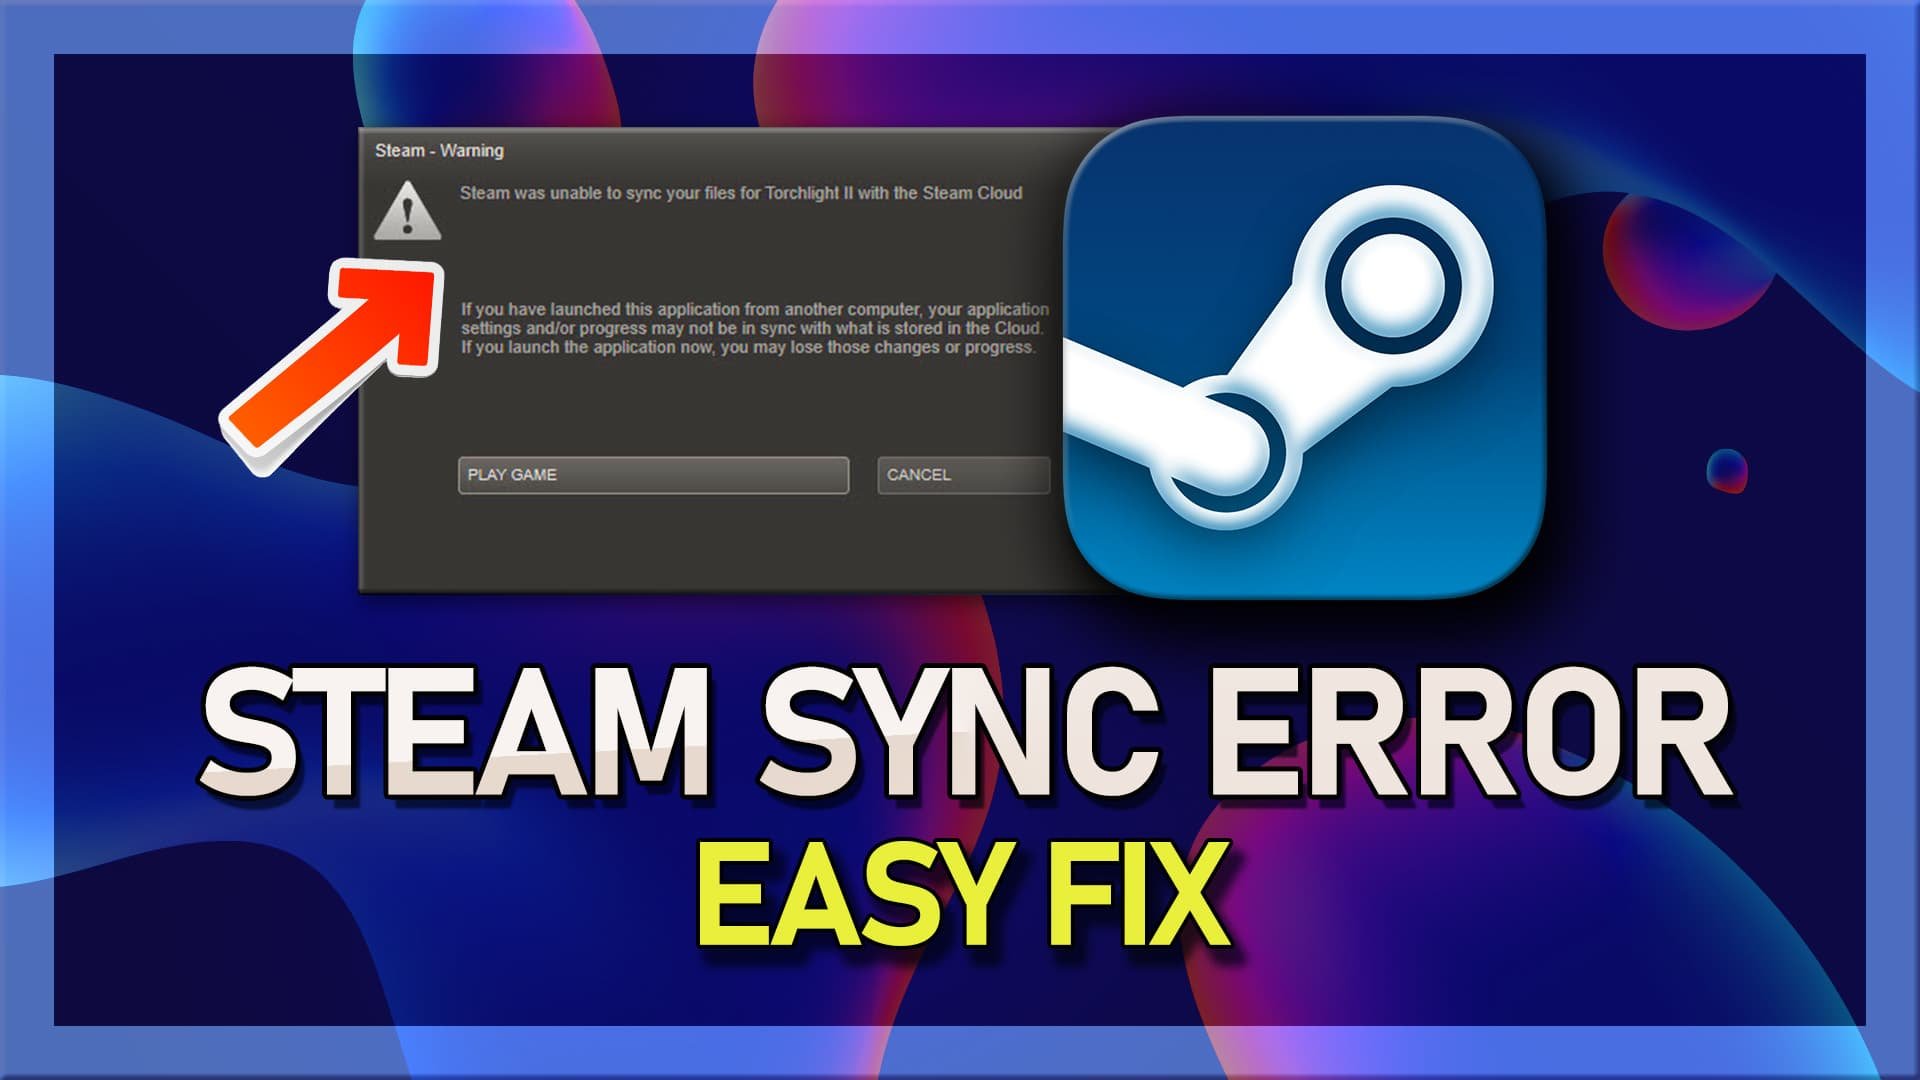 Fatal error online session interface missing please make sure steam is running фото 21